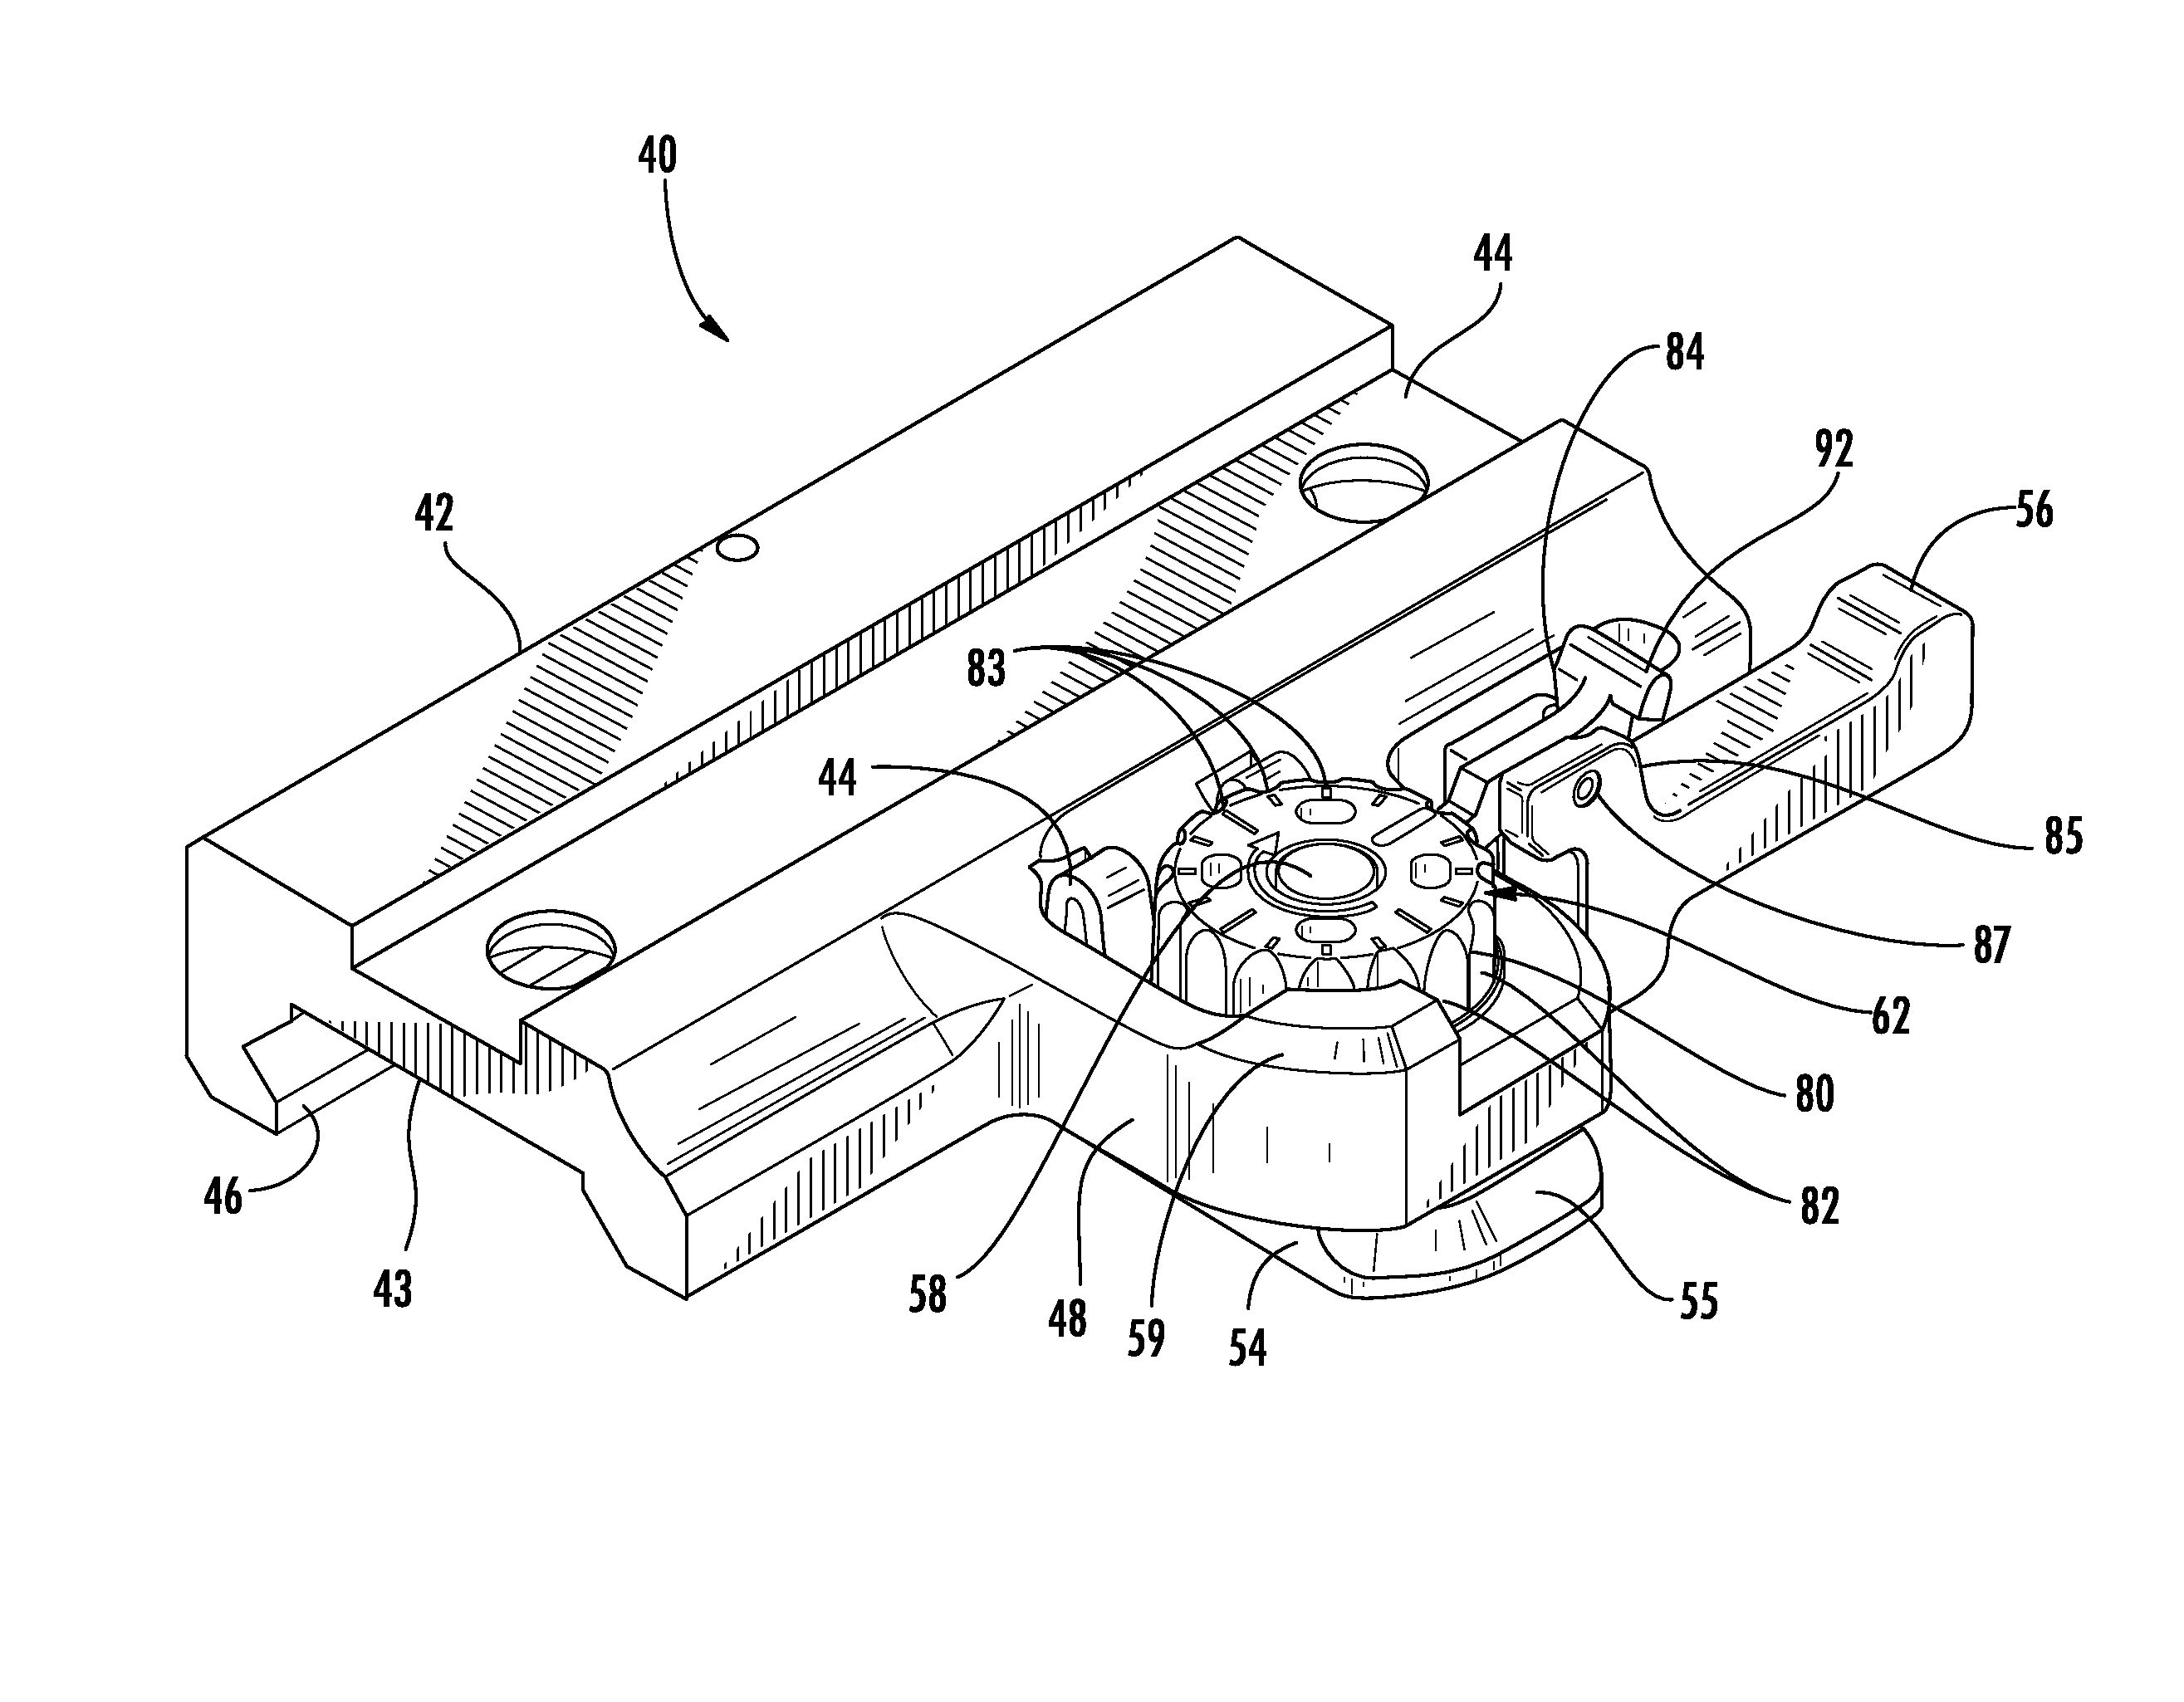 Mounting assembly with adjustable spring tension and pivoting lock lever